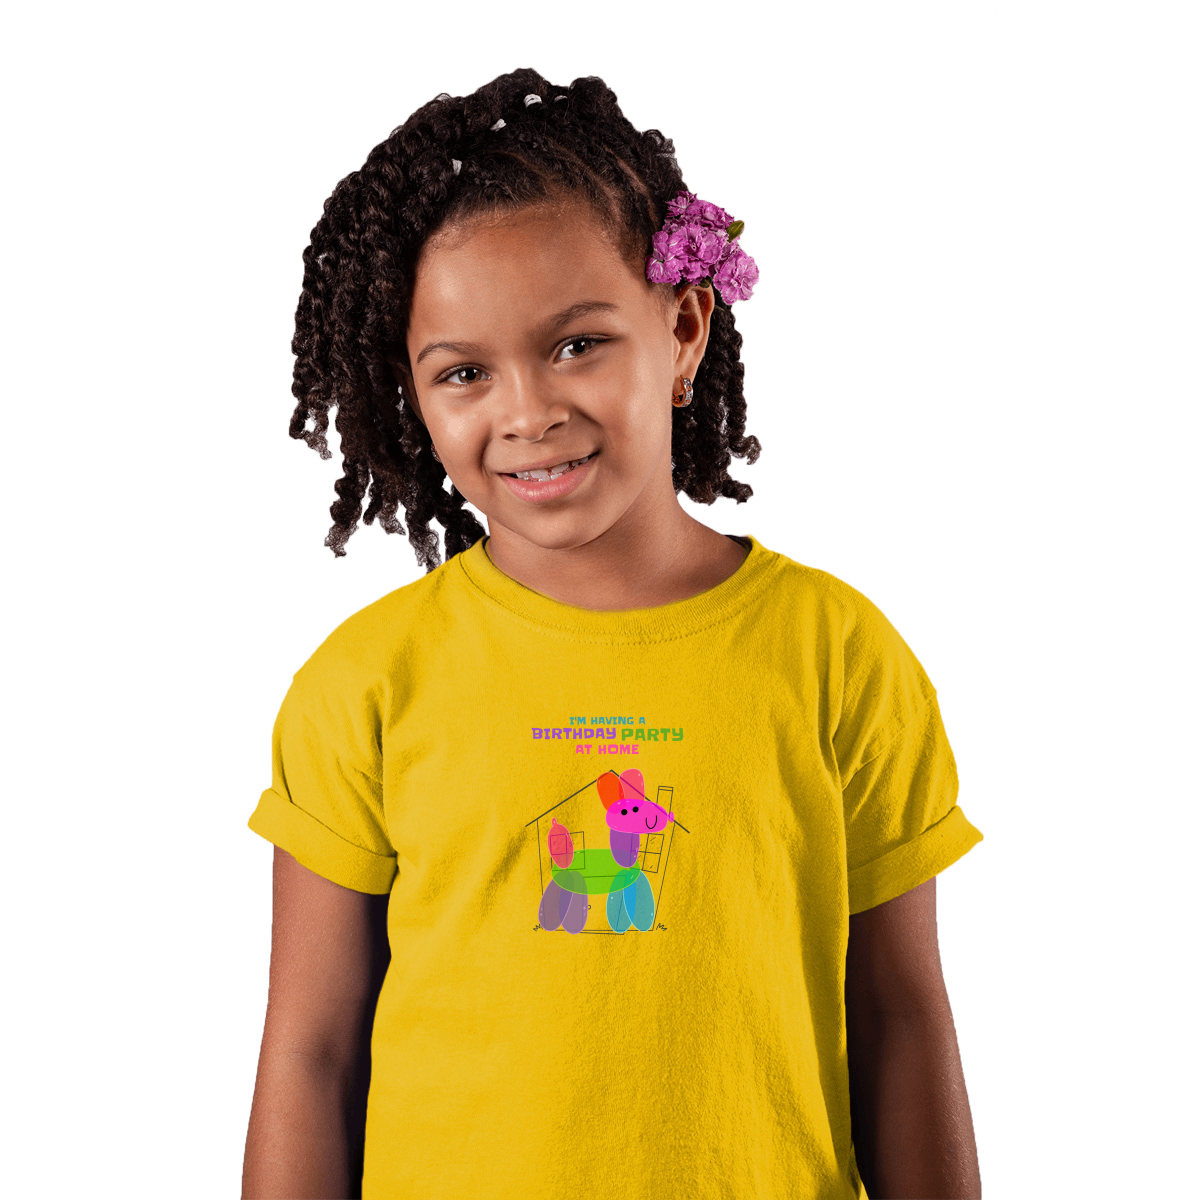 I'm having a birthday party at home  Toddler T-shirt | Yellow